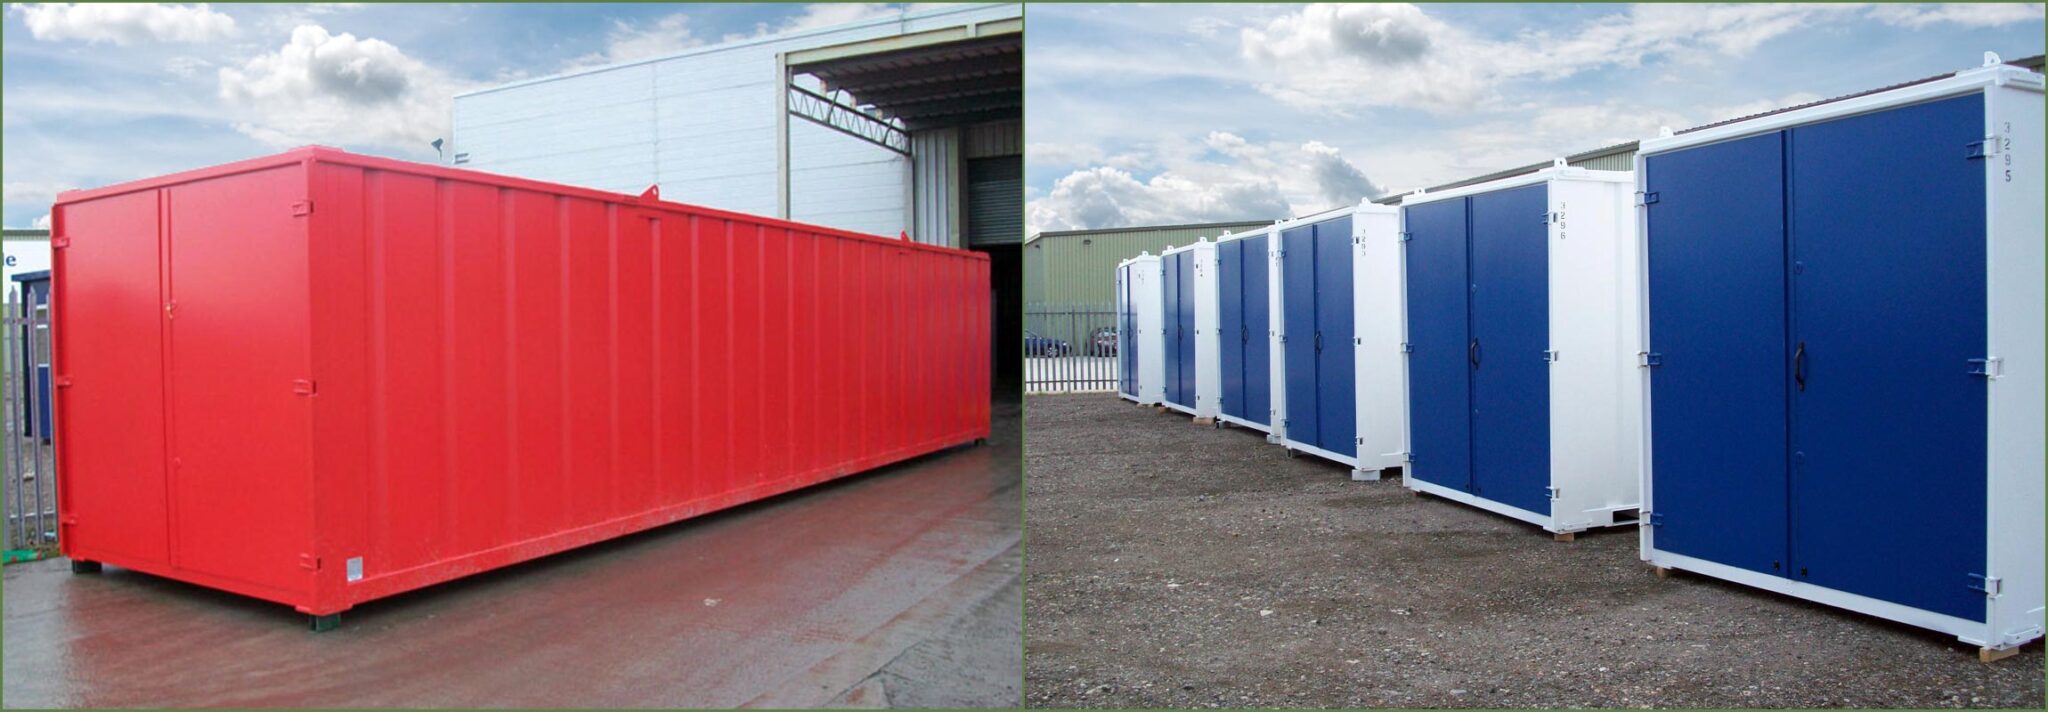 Suppliers of Secure Steel Container Buildings